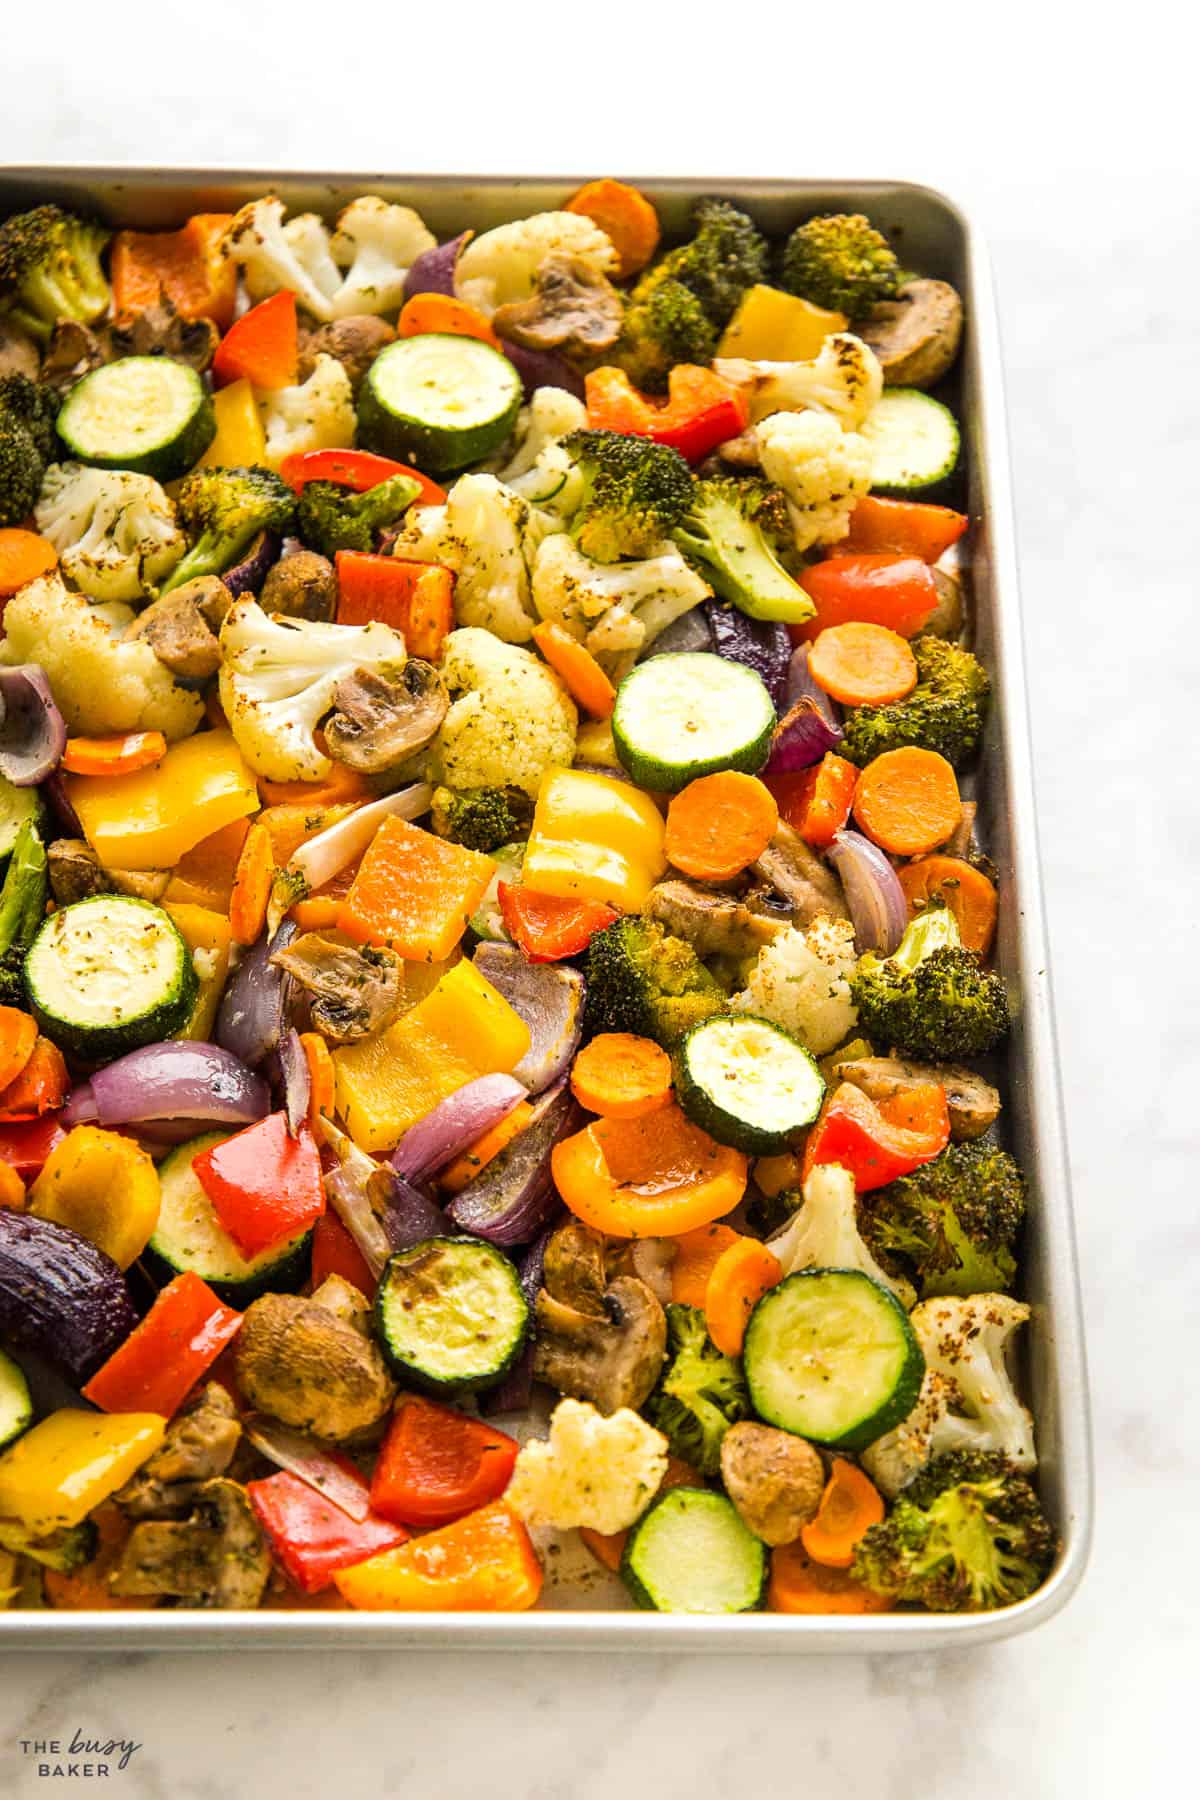 cauliflower, mushrooms, broccoli, peppers, carrots, onions, and zucchini on a sheet pan with seasoning